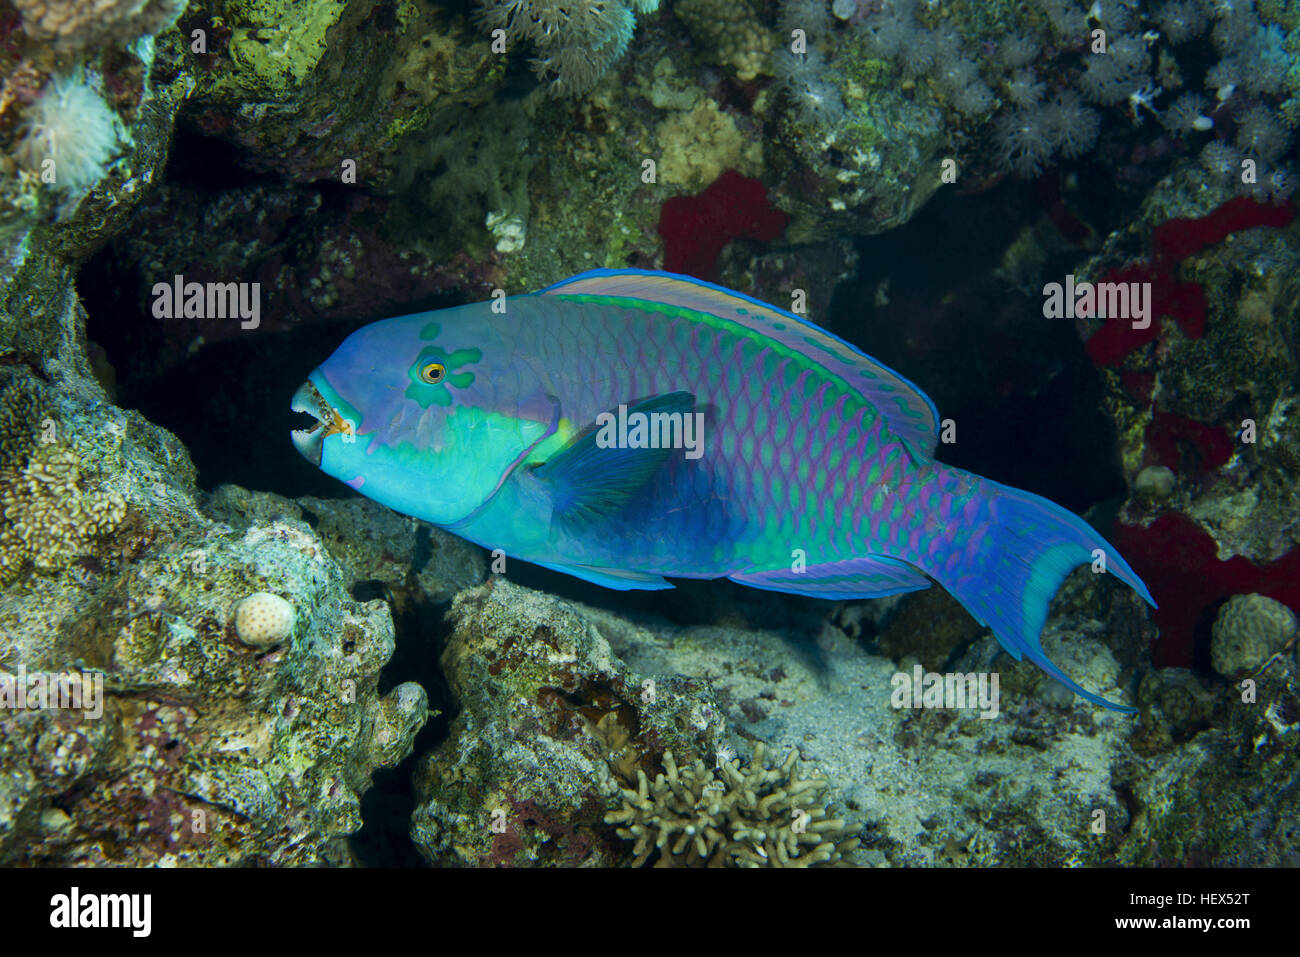 Steephead Parrotfish, Blunt-headed parrotfish or Gibbus parrotfish (Chlorurus gibbus) on a background of a coral reef, Red Sea, Egypt Stock Photo